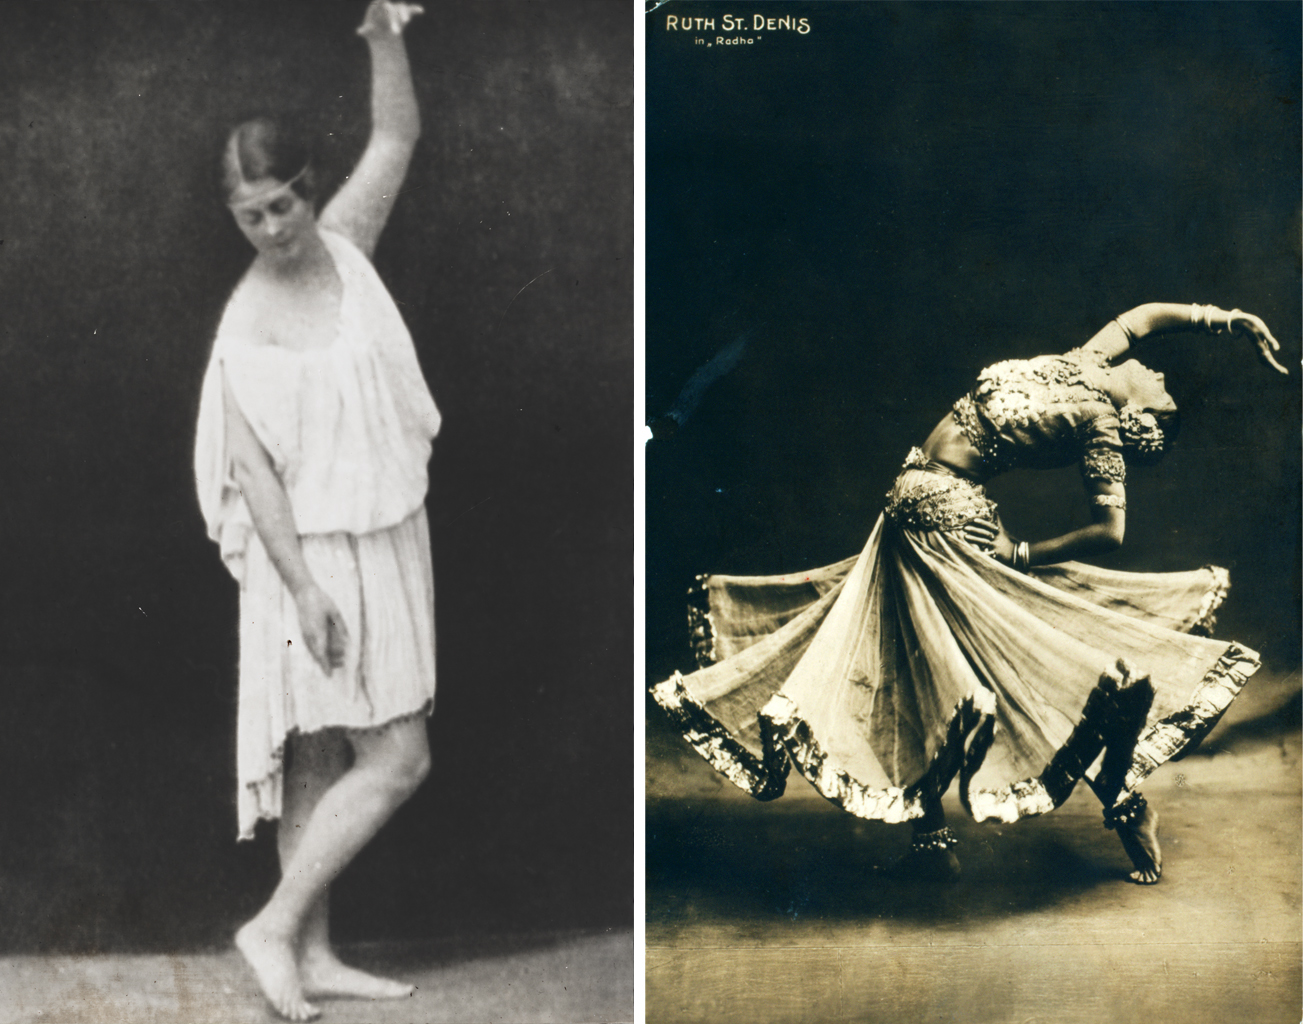 Right: Isadora Duncan dancing, 1903. Right: Ruth St. Denis in Radha, c. 1906 (New York Public Library)